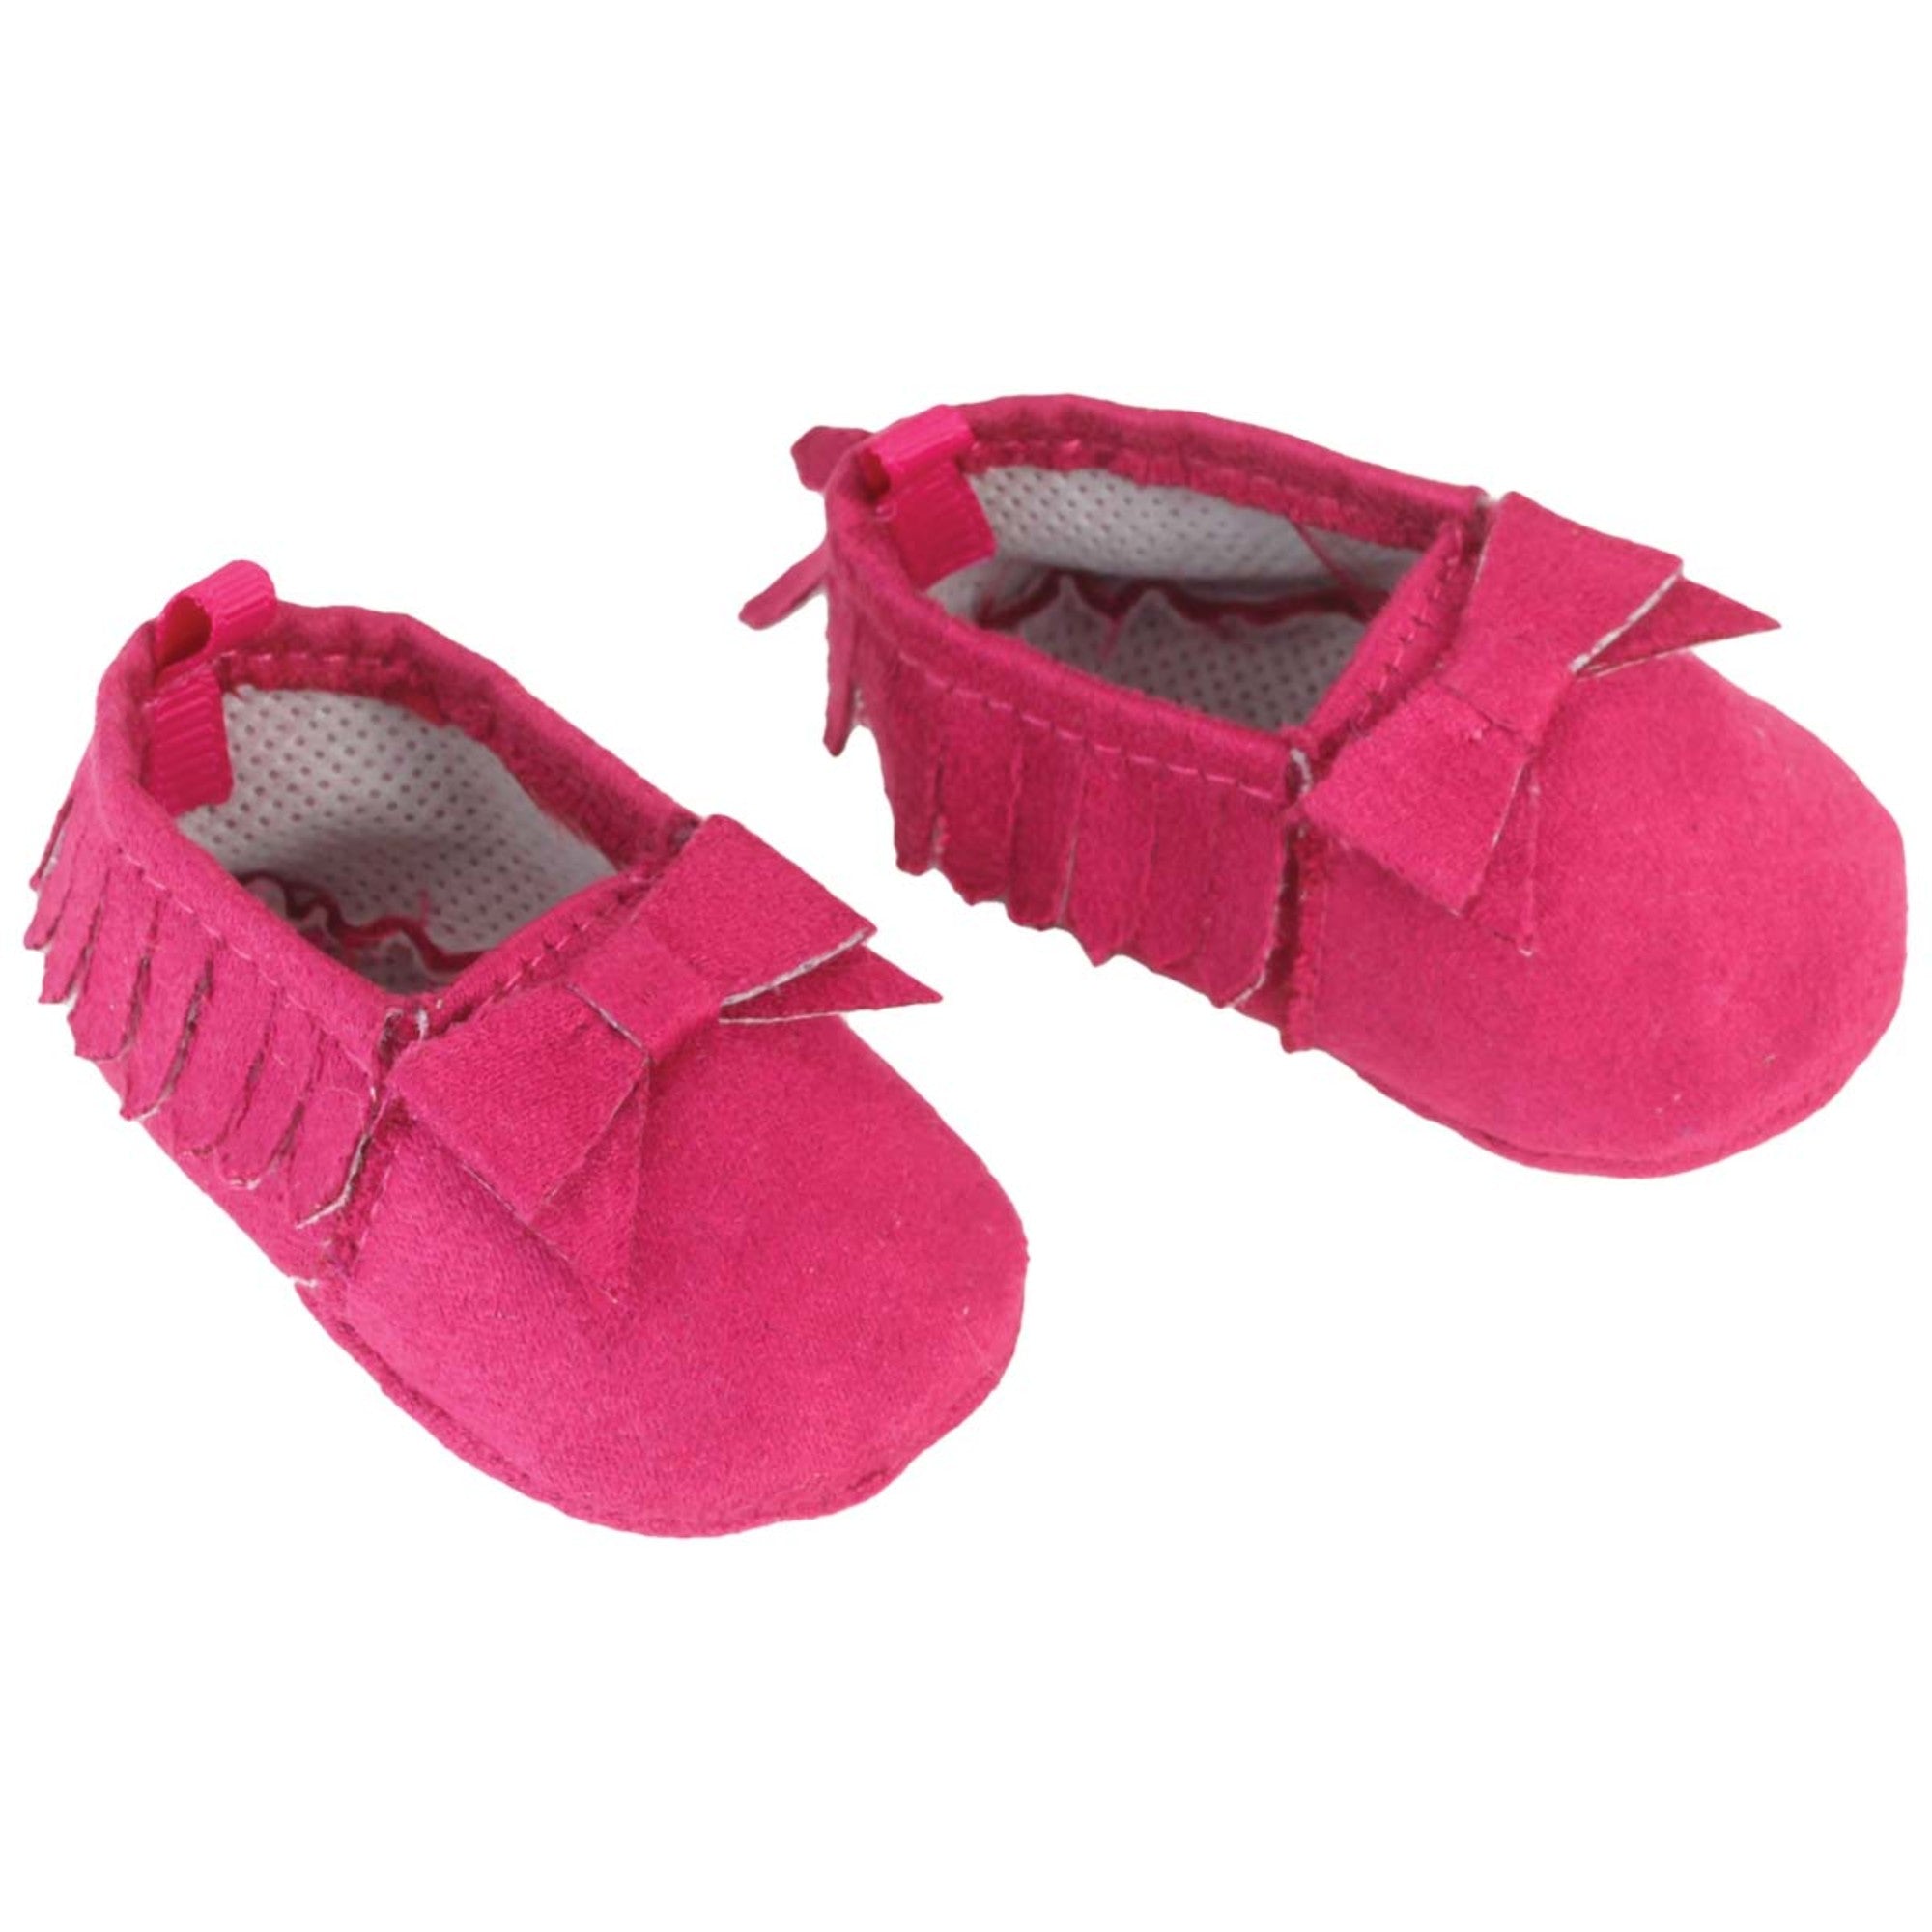 Sophia’s Small Adorable Mix & Match Suede Slip-On Moccasin Shoes with Fringe Details and Bows for 15” Baby Dolls, Hot Pink